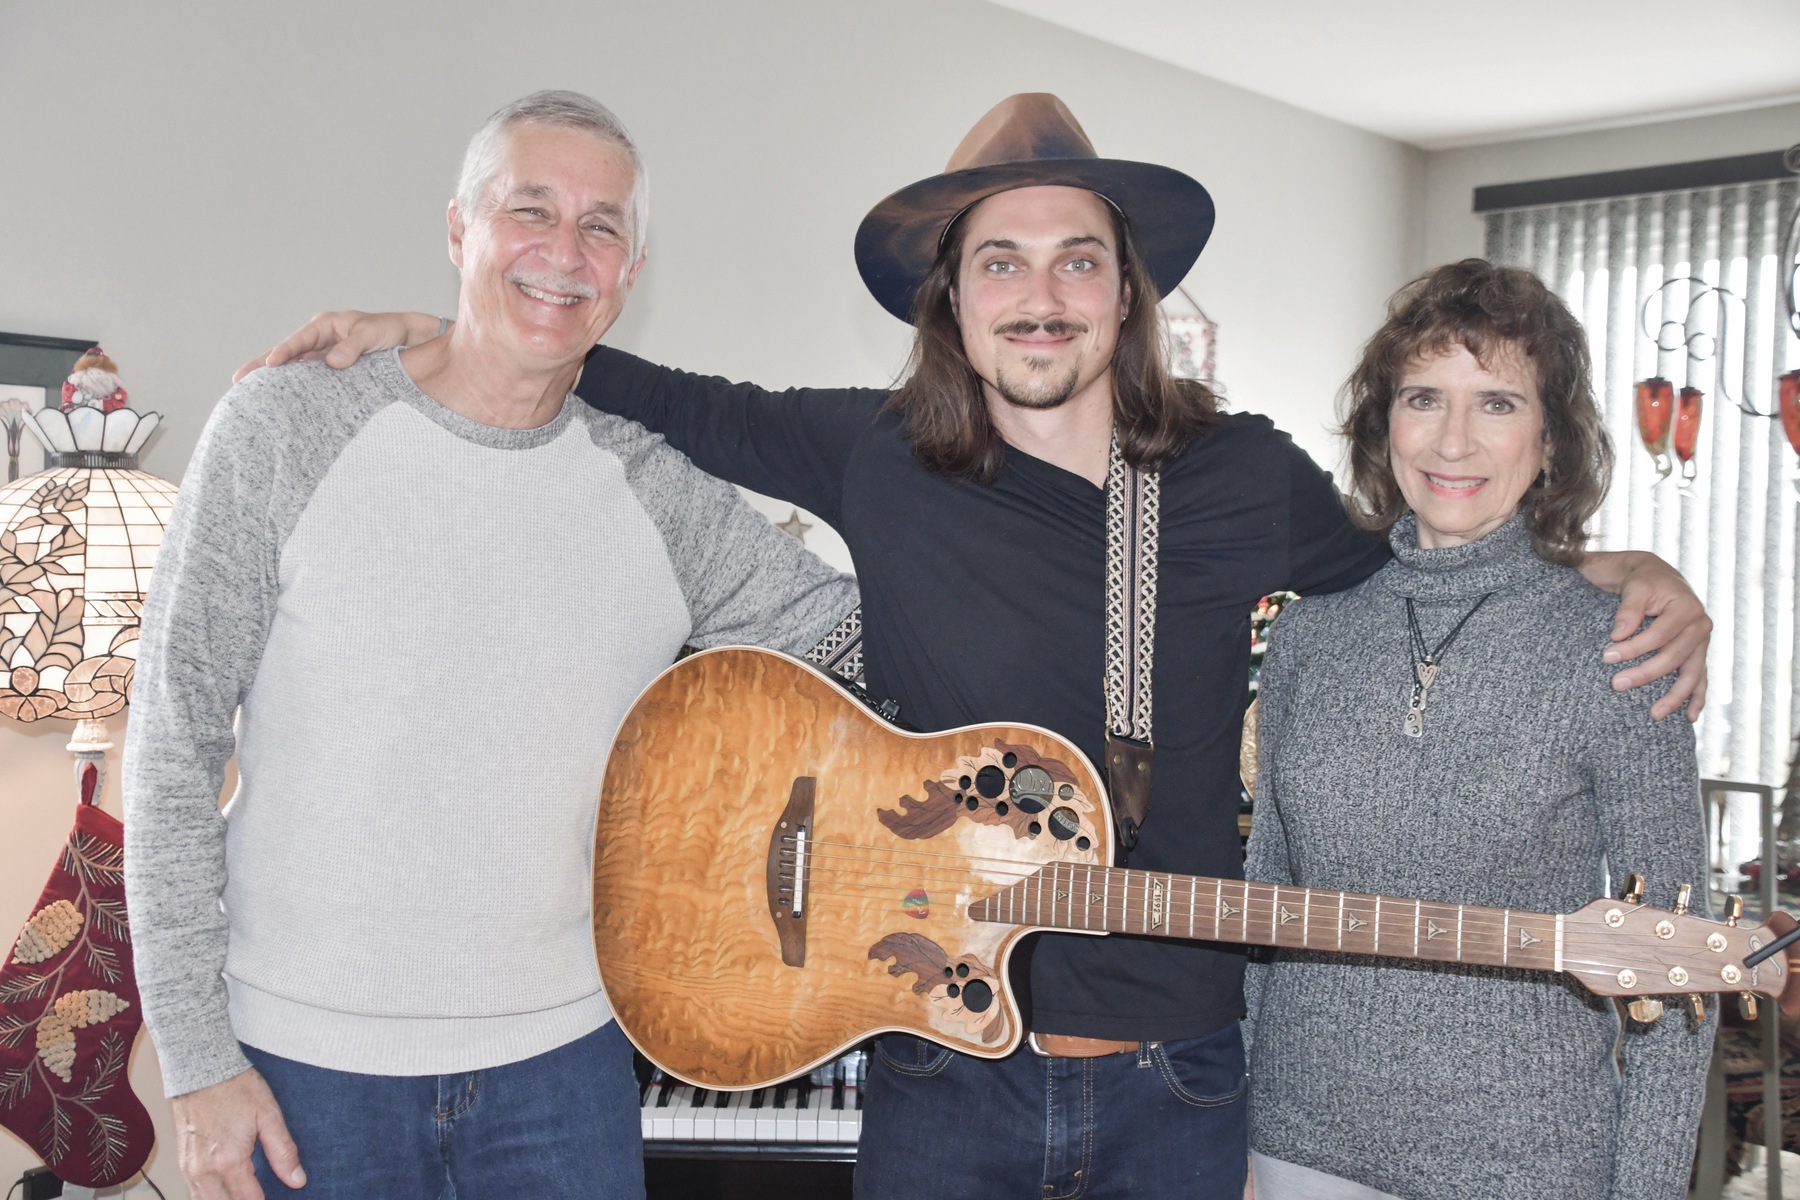 Eddy Birth singer/songwriter with proud parents Ed and Sue. (Photo by Christine Such/My Sun Day News)